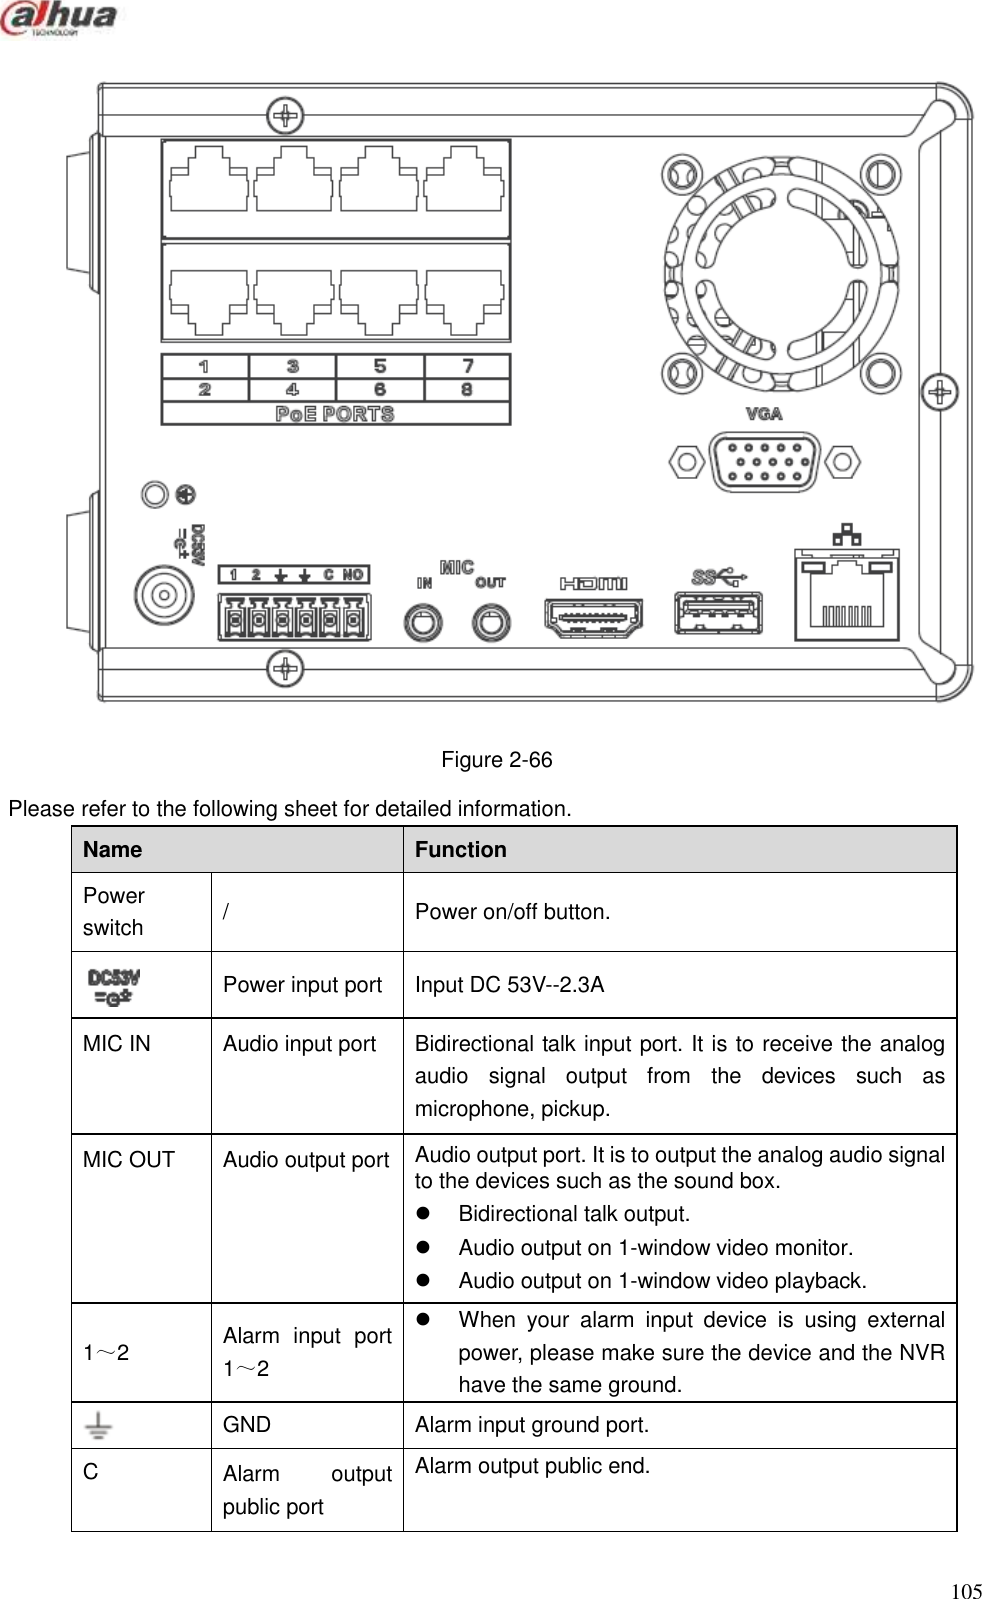  105   Figure 2-66 Please refer to the following sheet for detailed information. Name   Function   Power switch / Power on/off button.  Power input port Input DC 53V--2.3A MIC IN Audio input port Bidirectional talk input port. It is to receive the analog audio  signal  output  from  the  devices  such  as microphone, pickup. MIC OUT Audio output port Audio output port. It is to output the analog audio signal to the devices such as the sound box.     Bidirectional talk output.     Audio output on 1-window video monitor.     Audio output on 1-window video playback. 1～2 Alarm  input  port 1～2   When  your  alarm  input  device  is  using  external power, please make sure the device and the NVR have the same ground.  GND Alarm input ground port.   C Alarm  output public port Alarm output public end. 